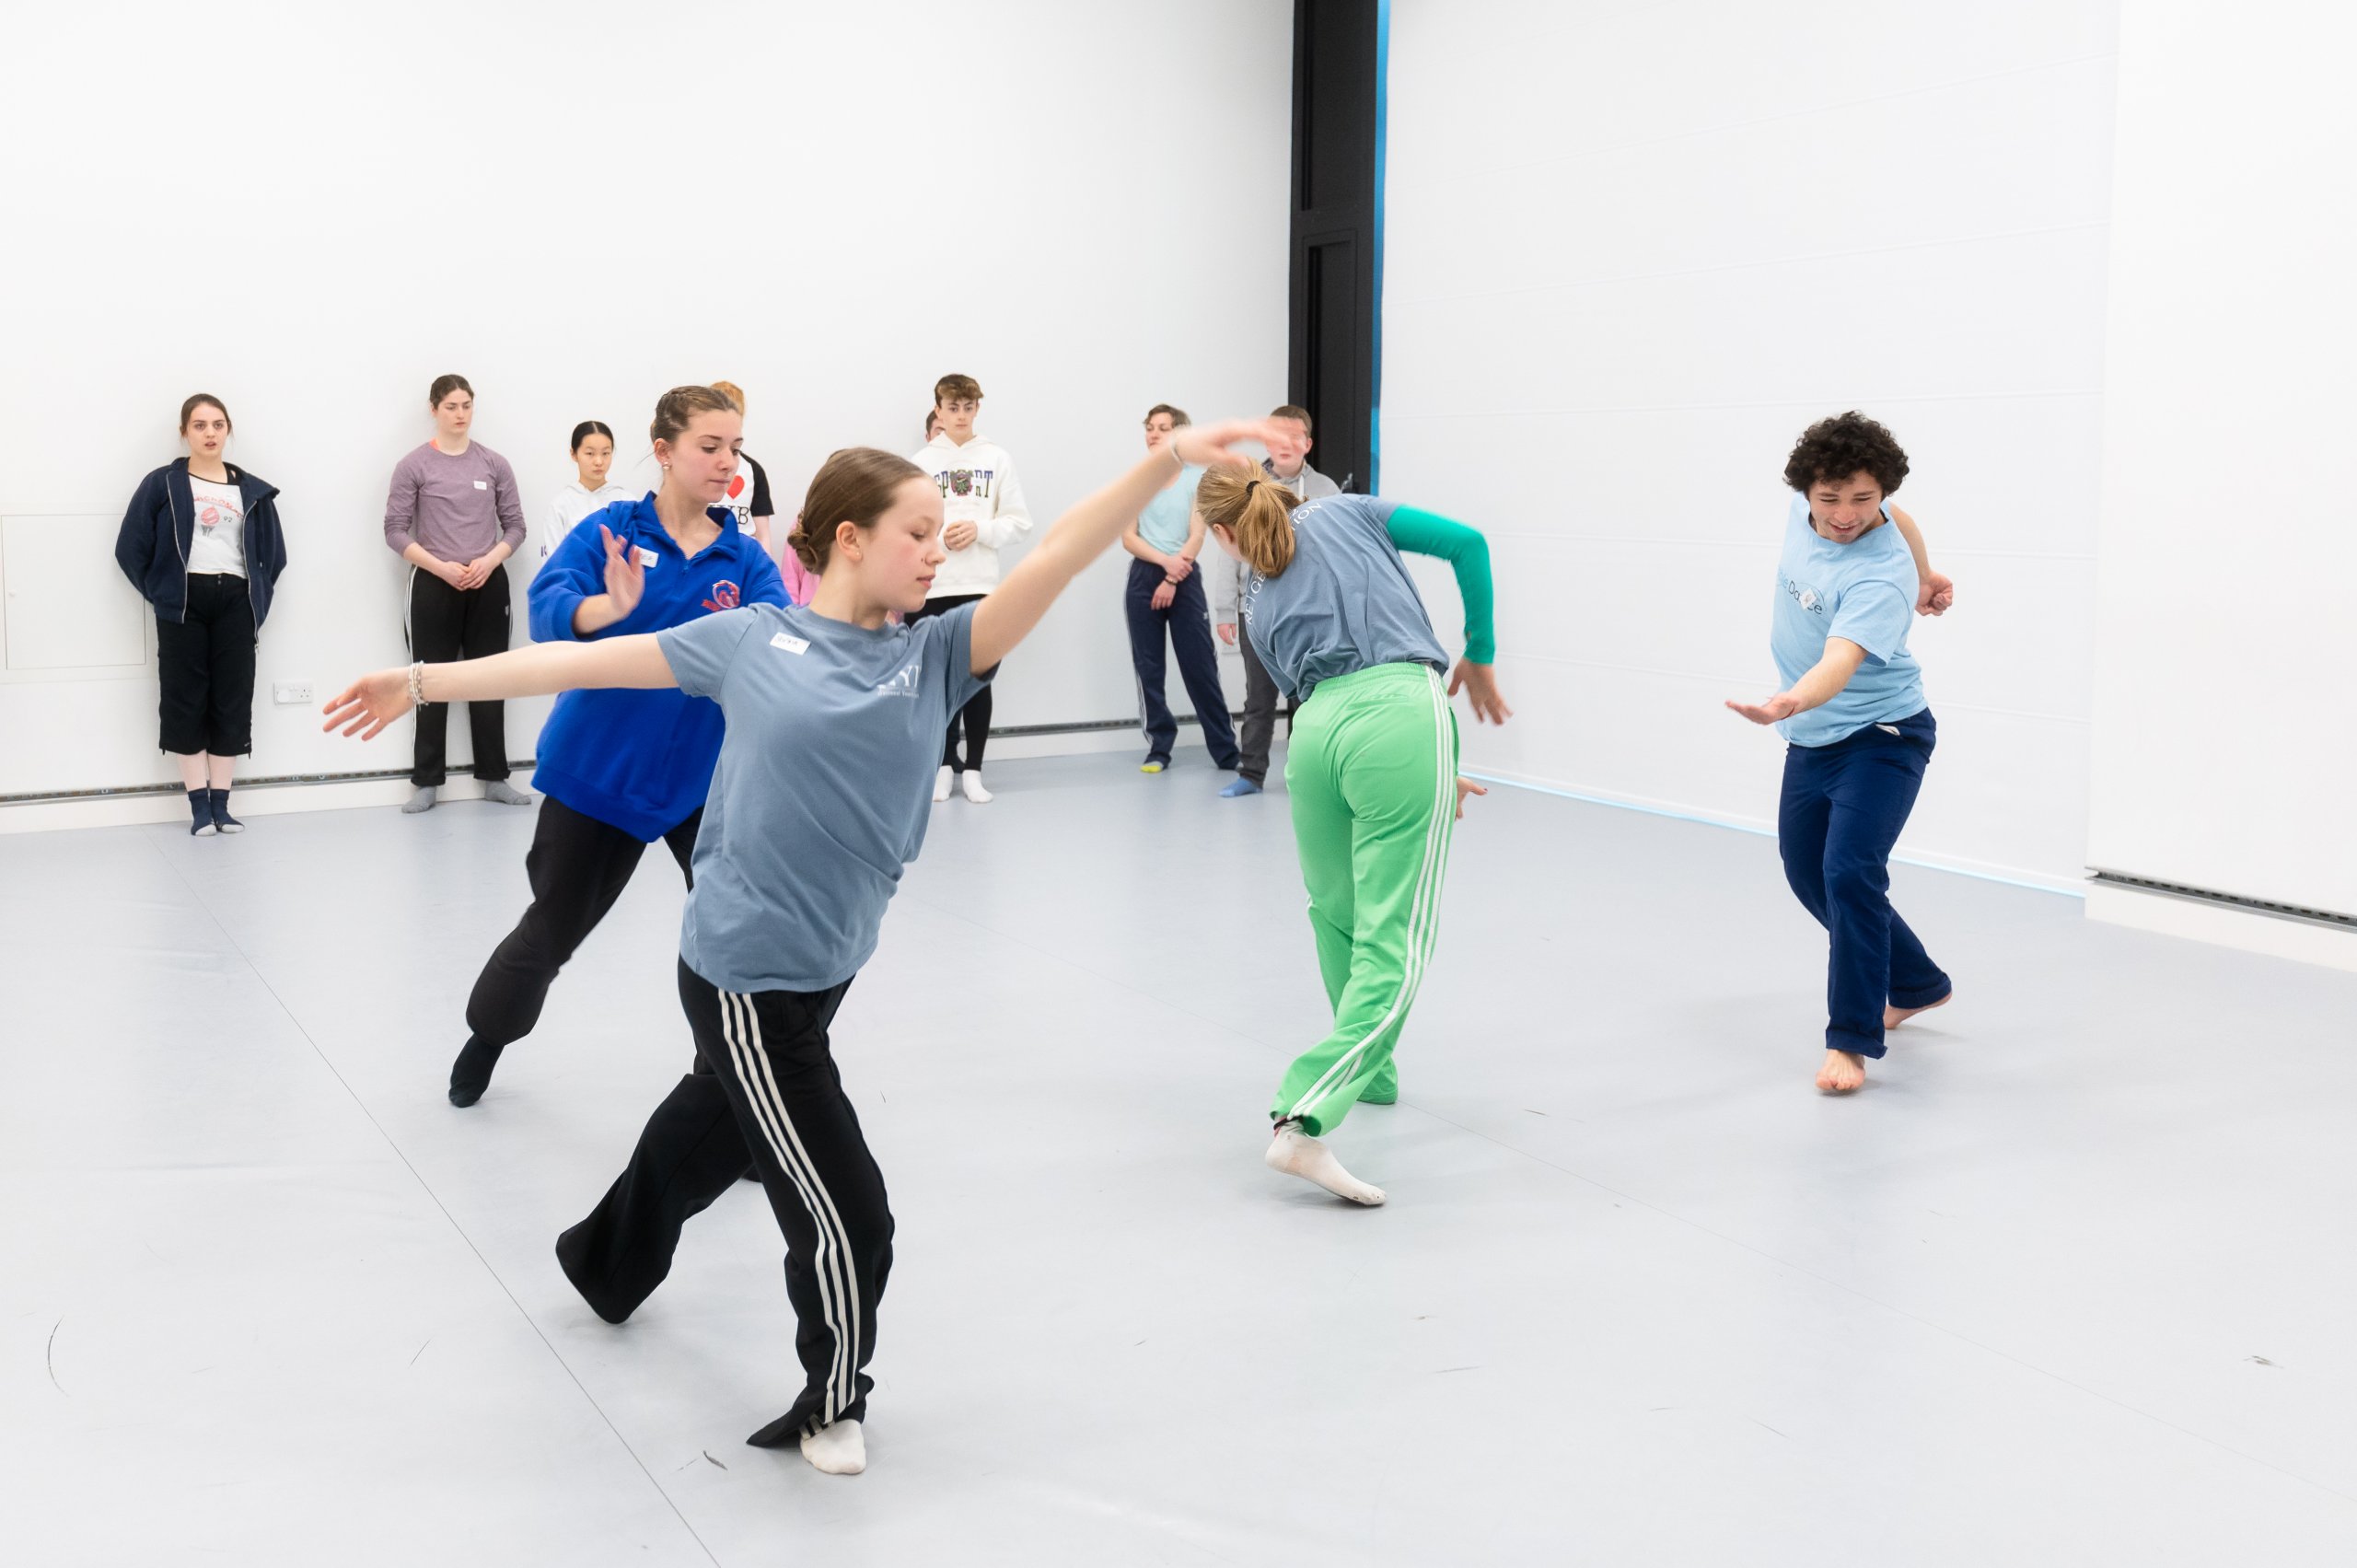 Many dancers sharing the studio space in a running motion, travelling in different directions with some dancers observing in the background. 